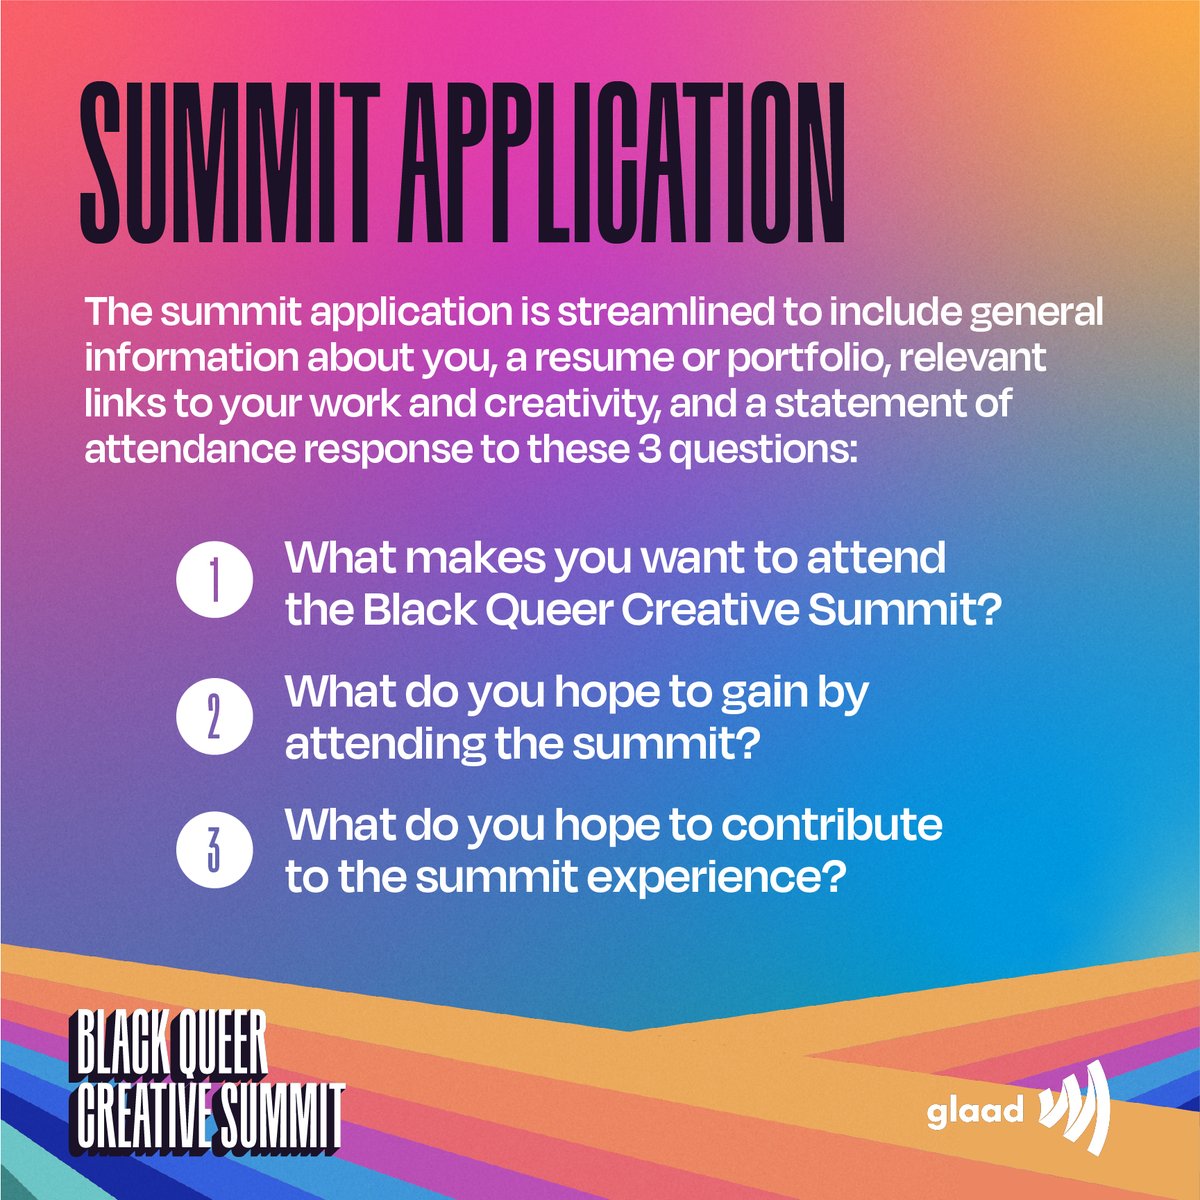 Exciting news! @glaad's inaugural Black Queer Creative Summit in LA, Sep 14-17. It focuses on equitable representation, industry conversations, and pathways for emerging Black LGBTQ+ creatives. 

Apply by June 12th, 11:59 PT at glaad.org/bqcs.